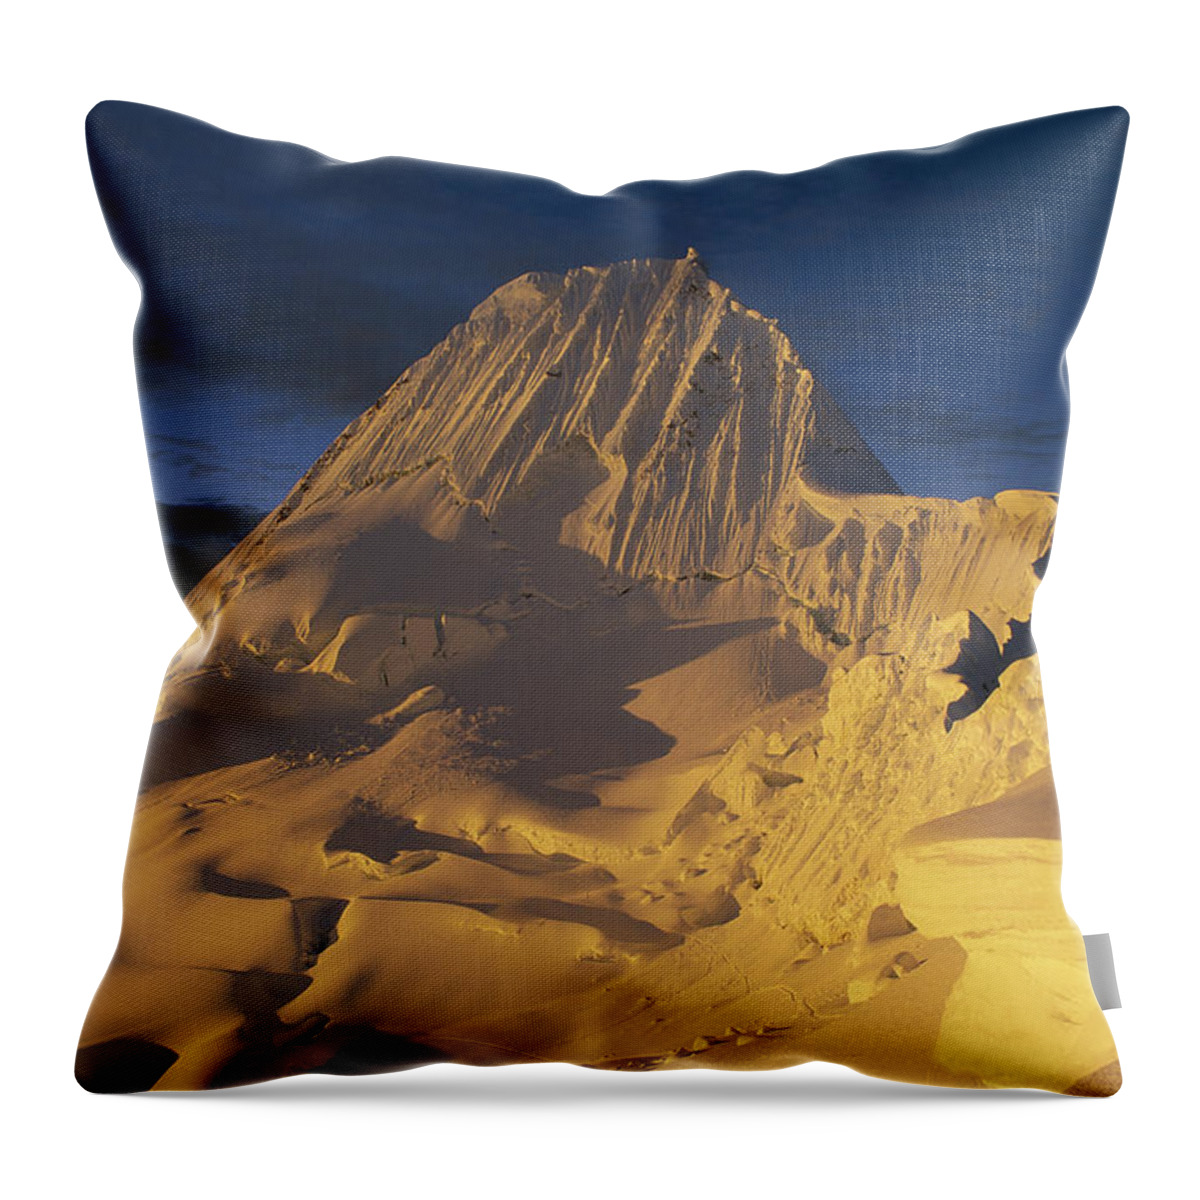 Feb0514 Throw Pillow featuring the photograph Southwest Face Of Alpamayo Peru by Grant Dixon